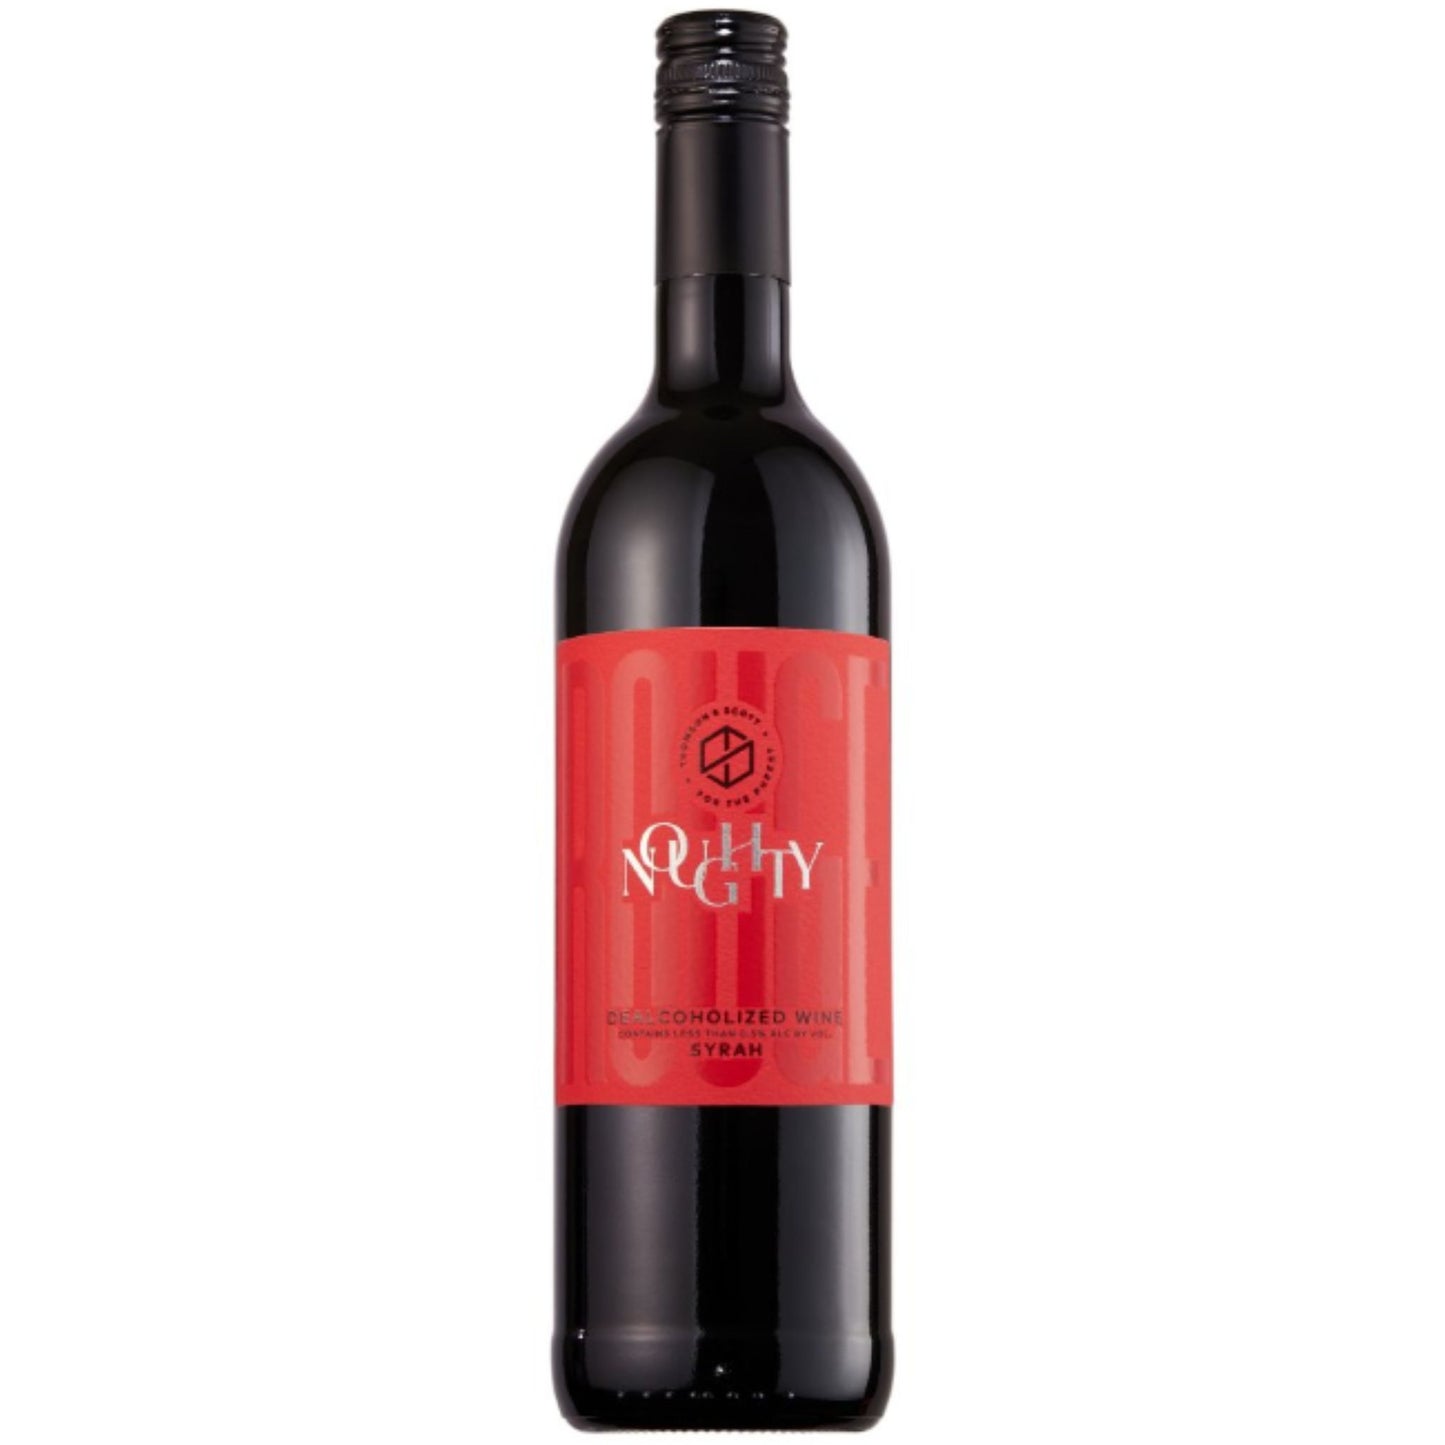 Noughty Rouge Dealcoholized Syrah non-alcoholic wine is available for sale at Knyota Drinks in Ottawa.